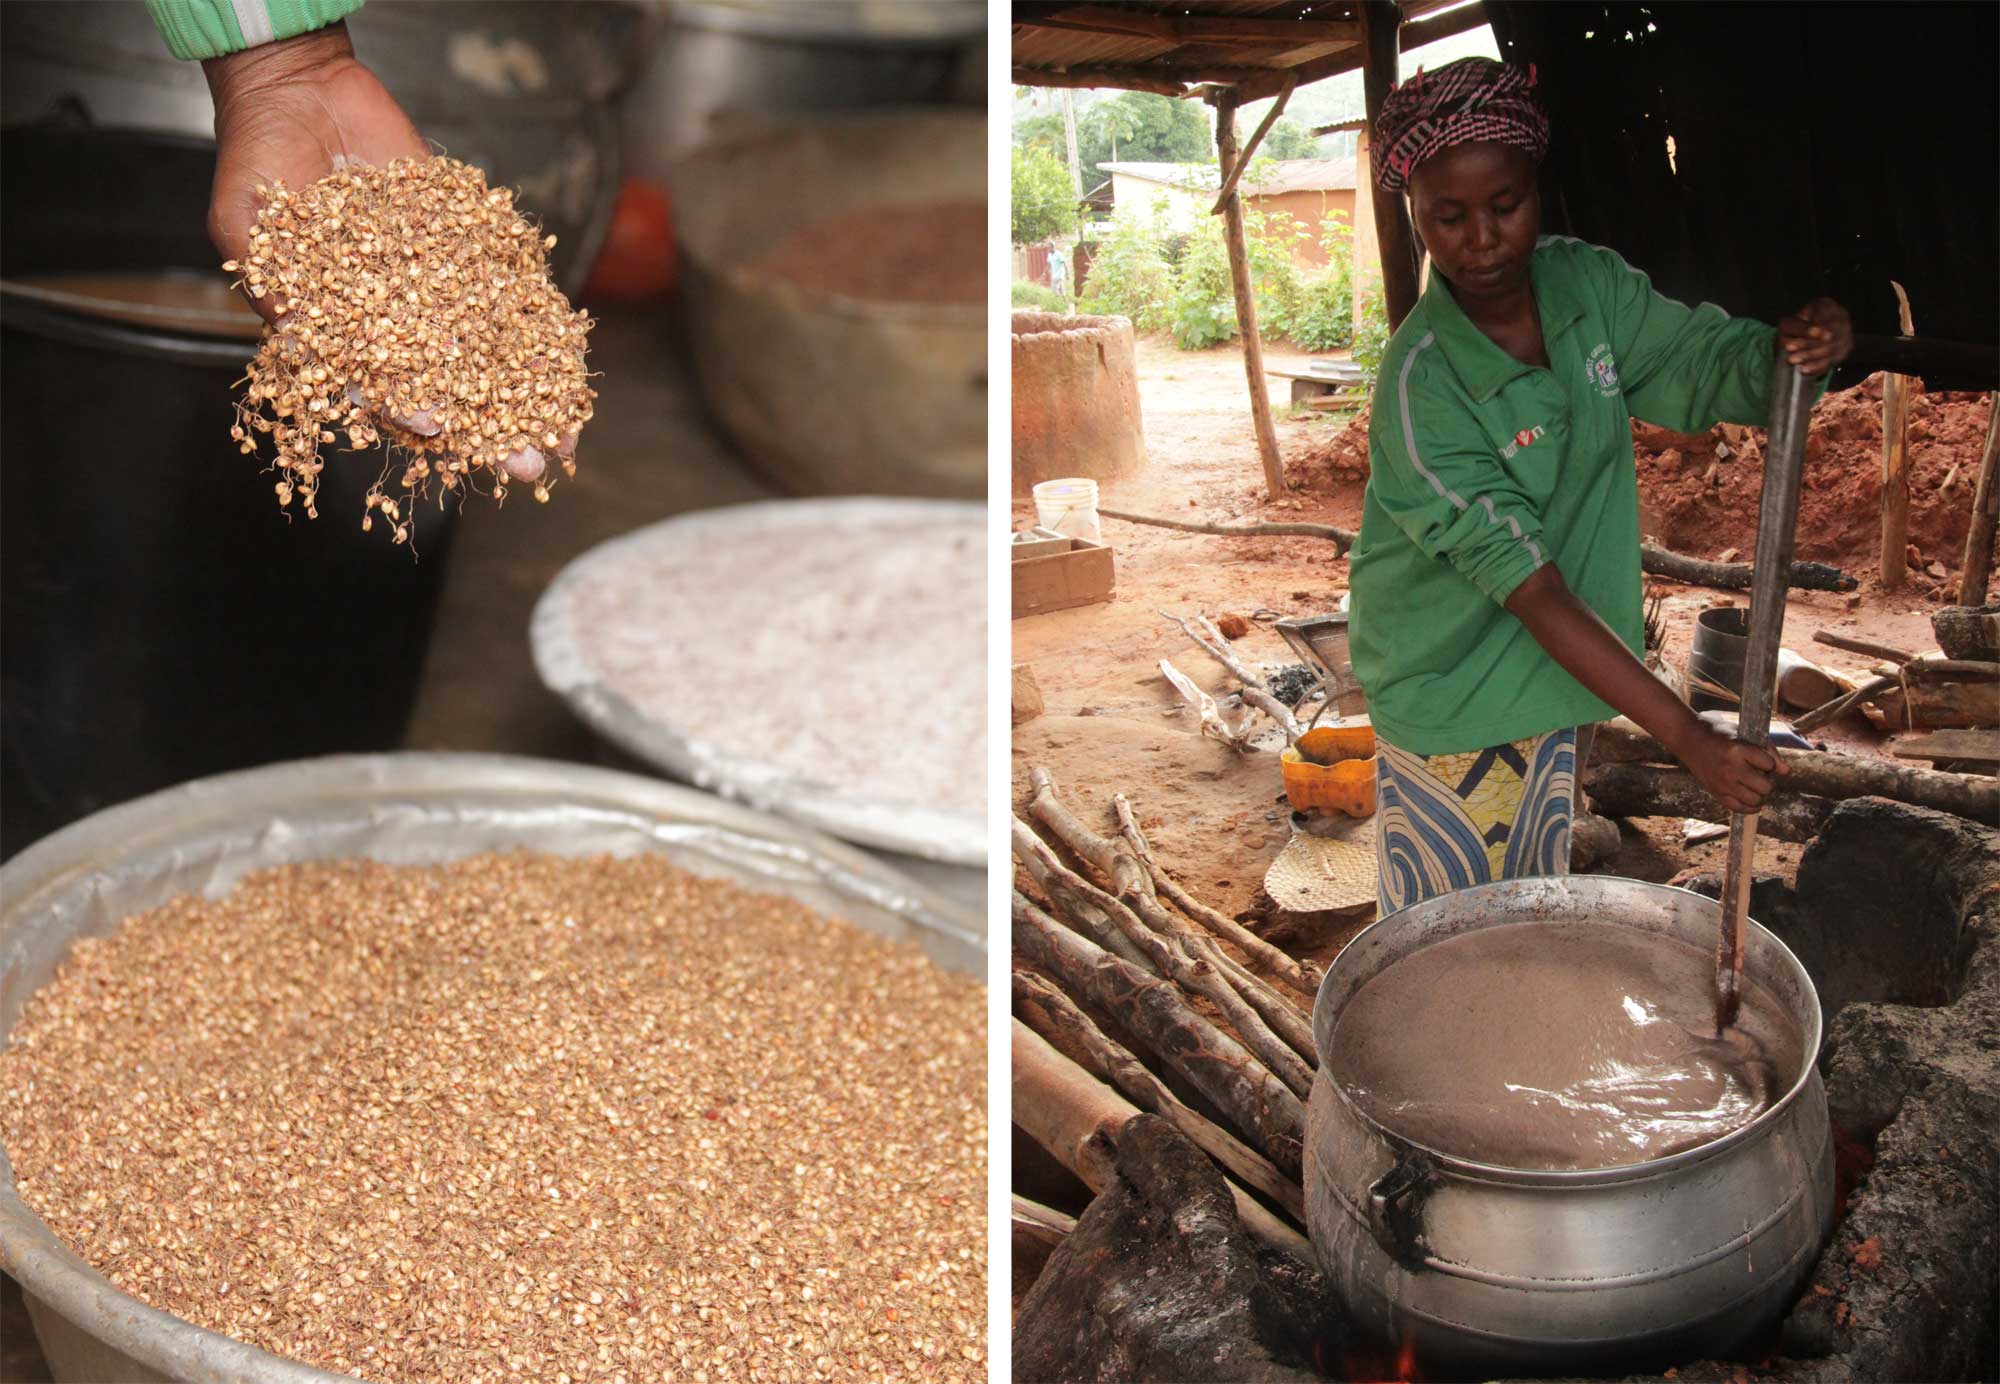 2-panel figure showing images of tchoukoutou brewing in Benin, Africa. Panel 1: A woman showing malted sorghum, sorghum that has been germinated and then dried. The grains are light brown and have roots coming out of them. Panel 2: A woman stirring tchoukoutou in a metal kettle. The tchoukoutou is an opaque brown liquid.